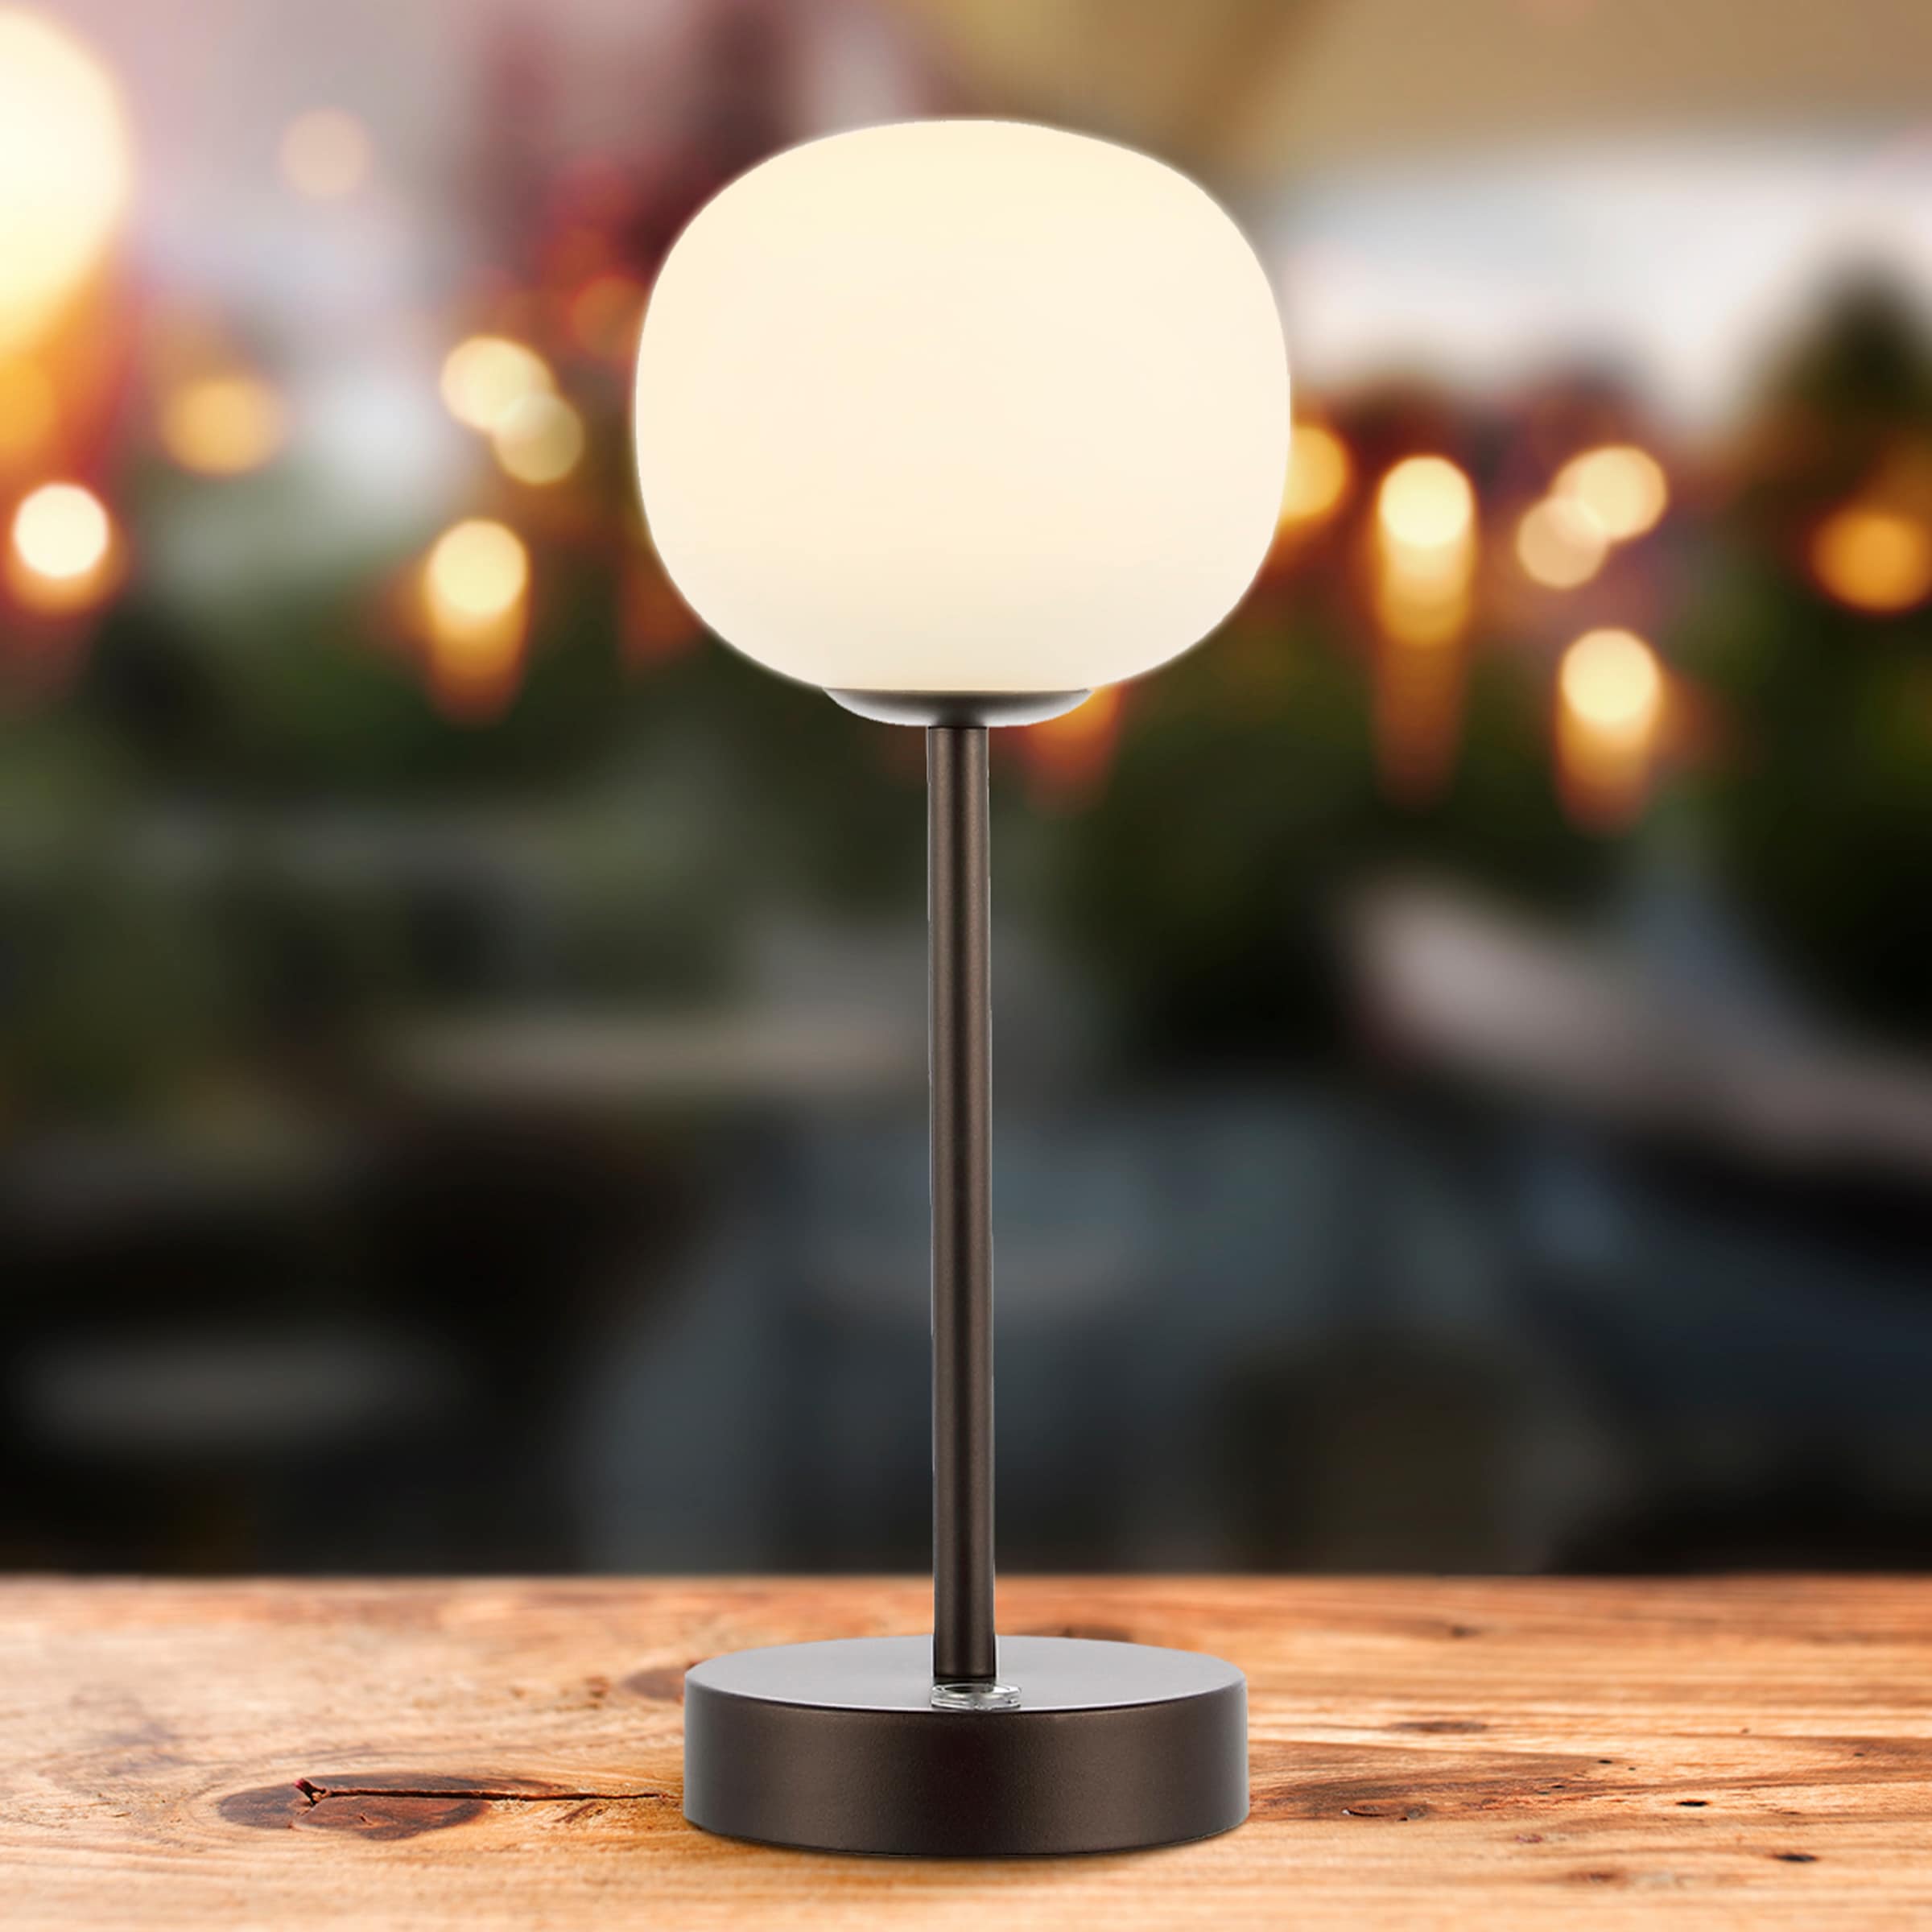 Battery Powered Table Lamps Cordless Battery Operated Lamps with Timer